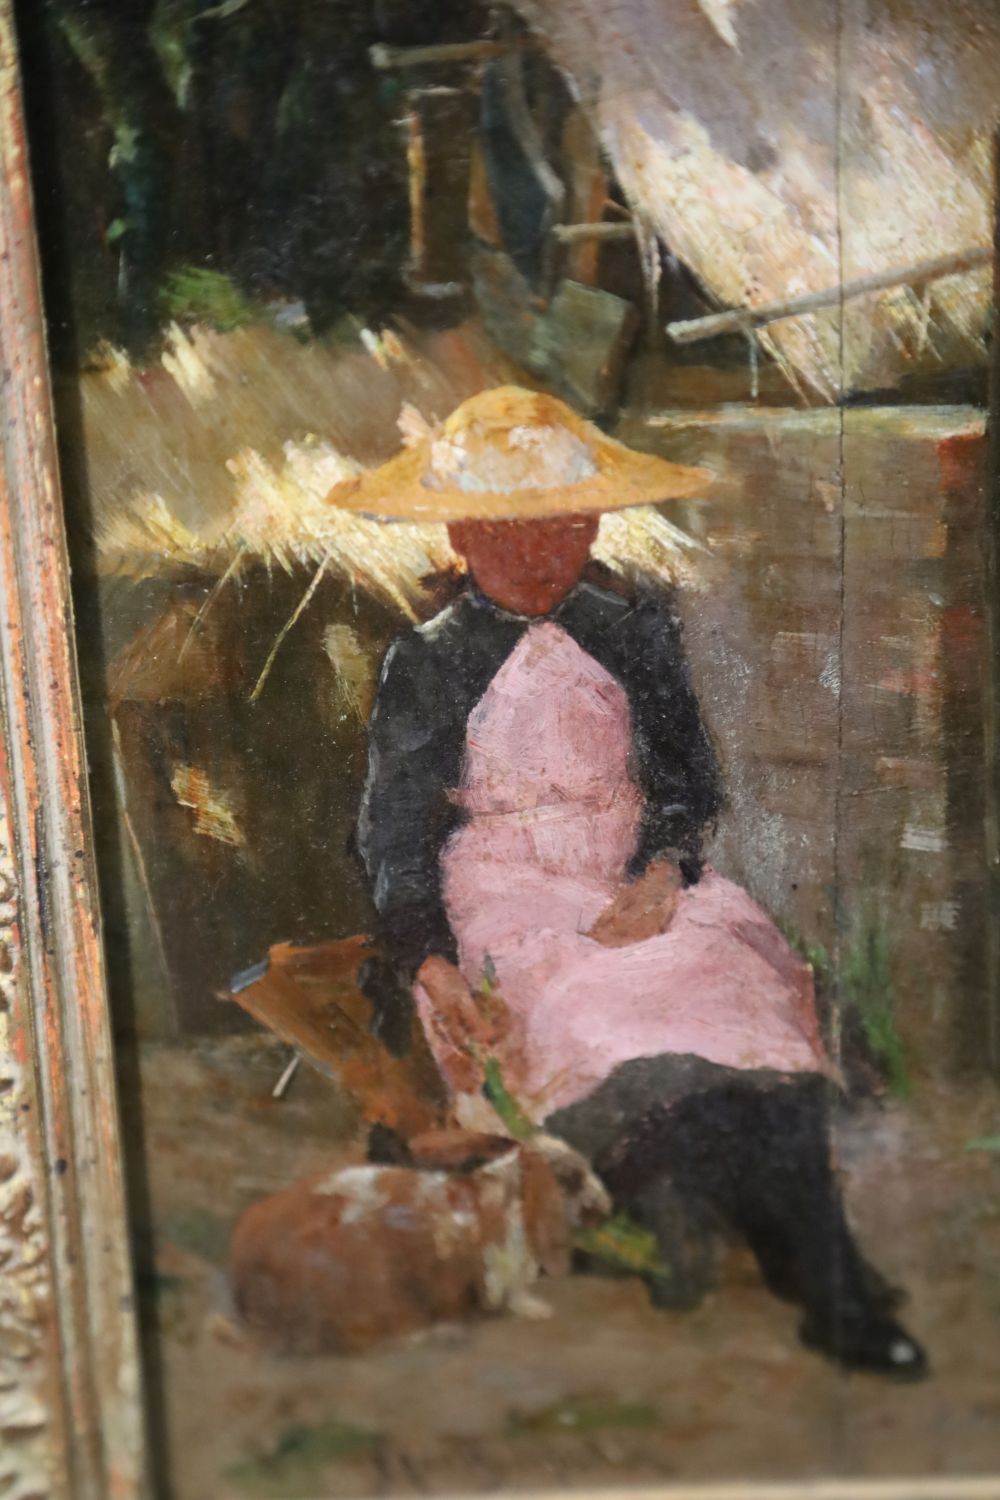 James Coutts Mitchie (1861-1919), oil on board, Garden scene with woman seated beside a rabbit, signed, 10 x 7in.